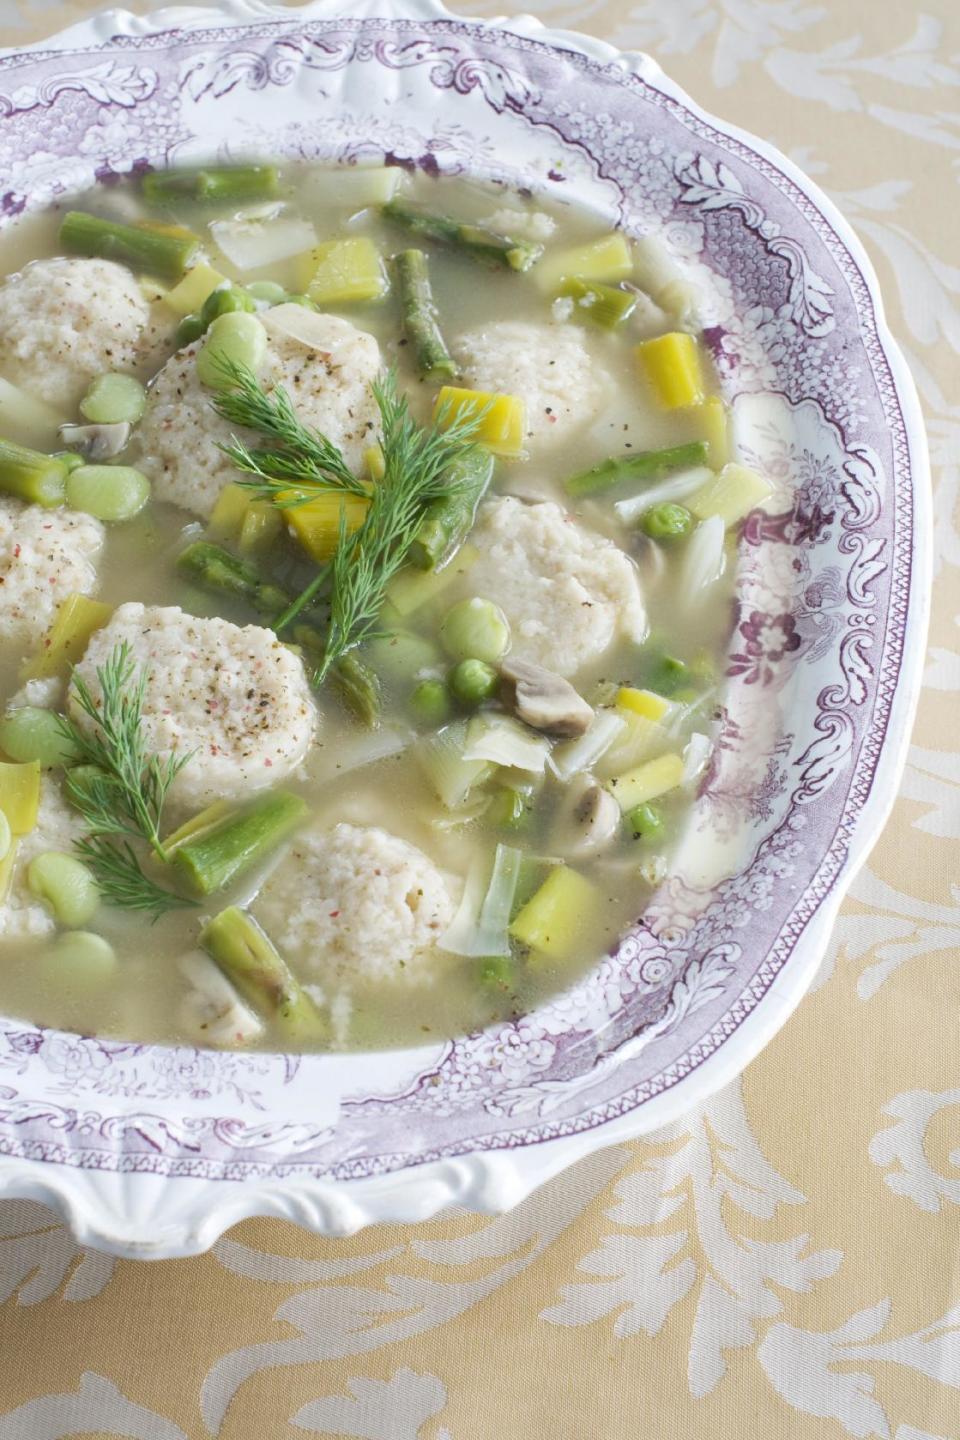 In this March 4, 2013 photo, spring vegetable soup with low-fat, high-flavor matzo balls is shown in a soup tureen in Concord, N.H. (AP Photo/Matthew Mead)